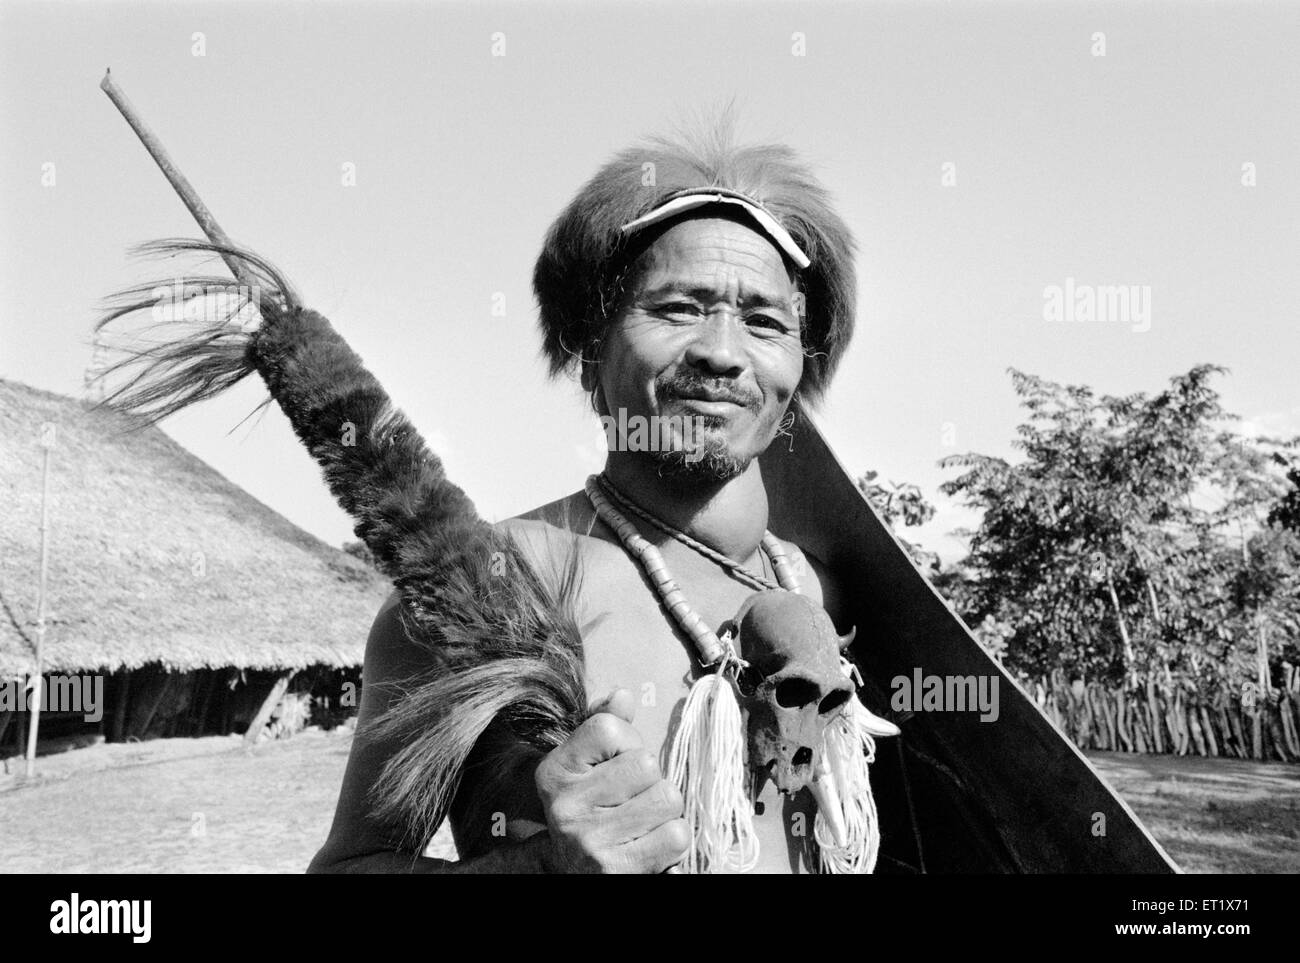 Wancho tribal in traditional attire and holding spear in Tirap district ; Arunachal Pradesh ; India 1982 NO MR Stock Photo